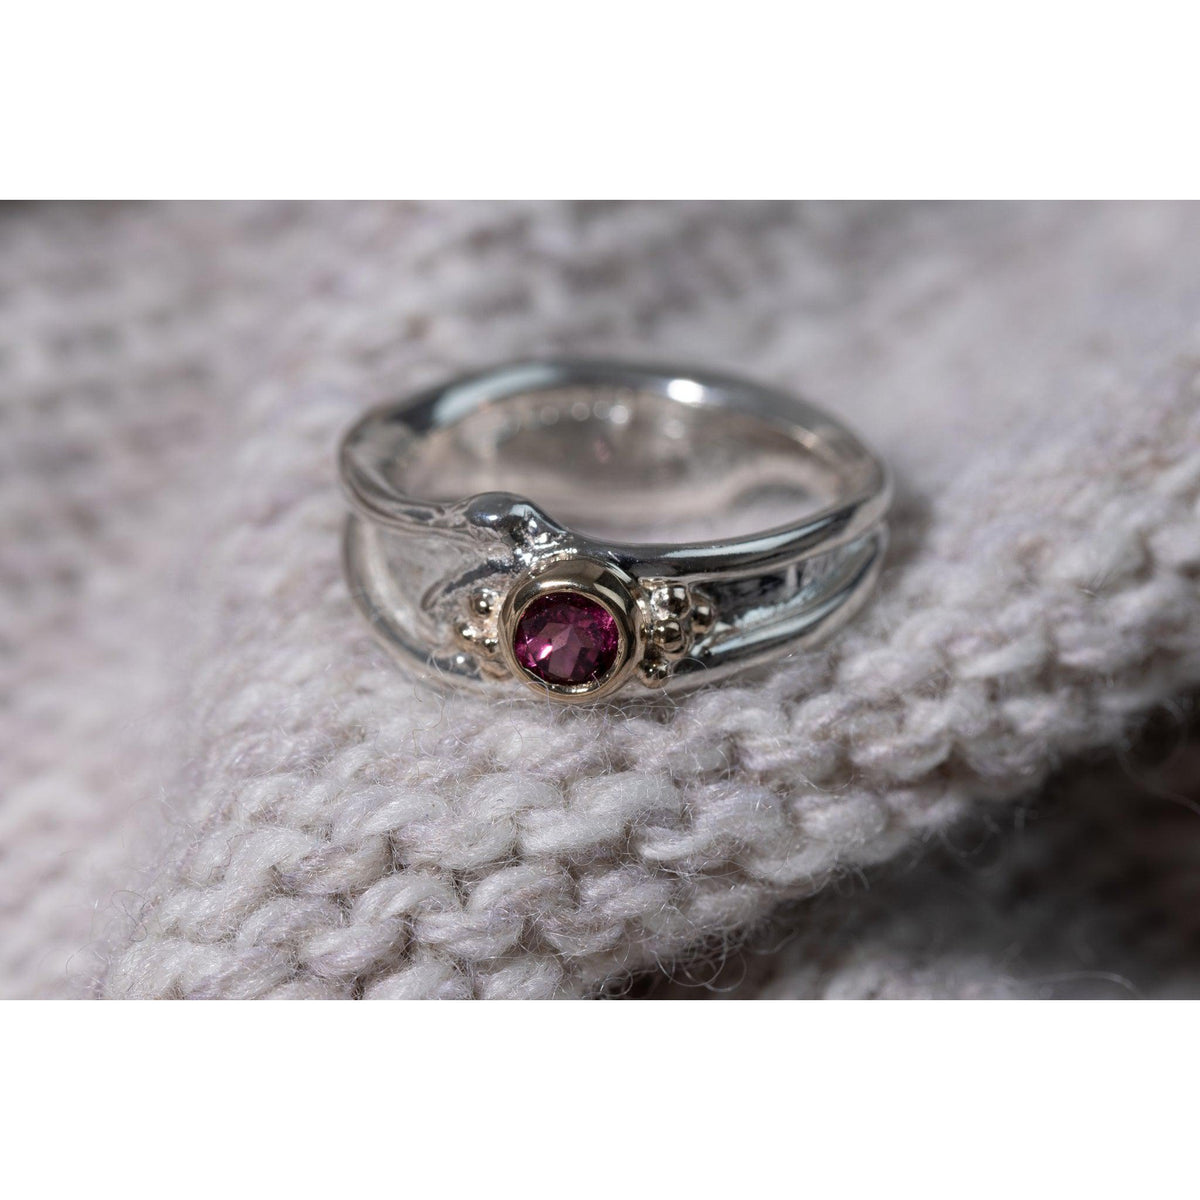 &#39;LG58 - Silver Ring with 9ct Gold 4mm Rhodalite &#39; by Les Grimshaw, available at Padstow Gallery, Cornwall